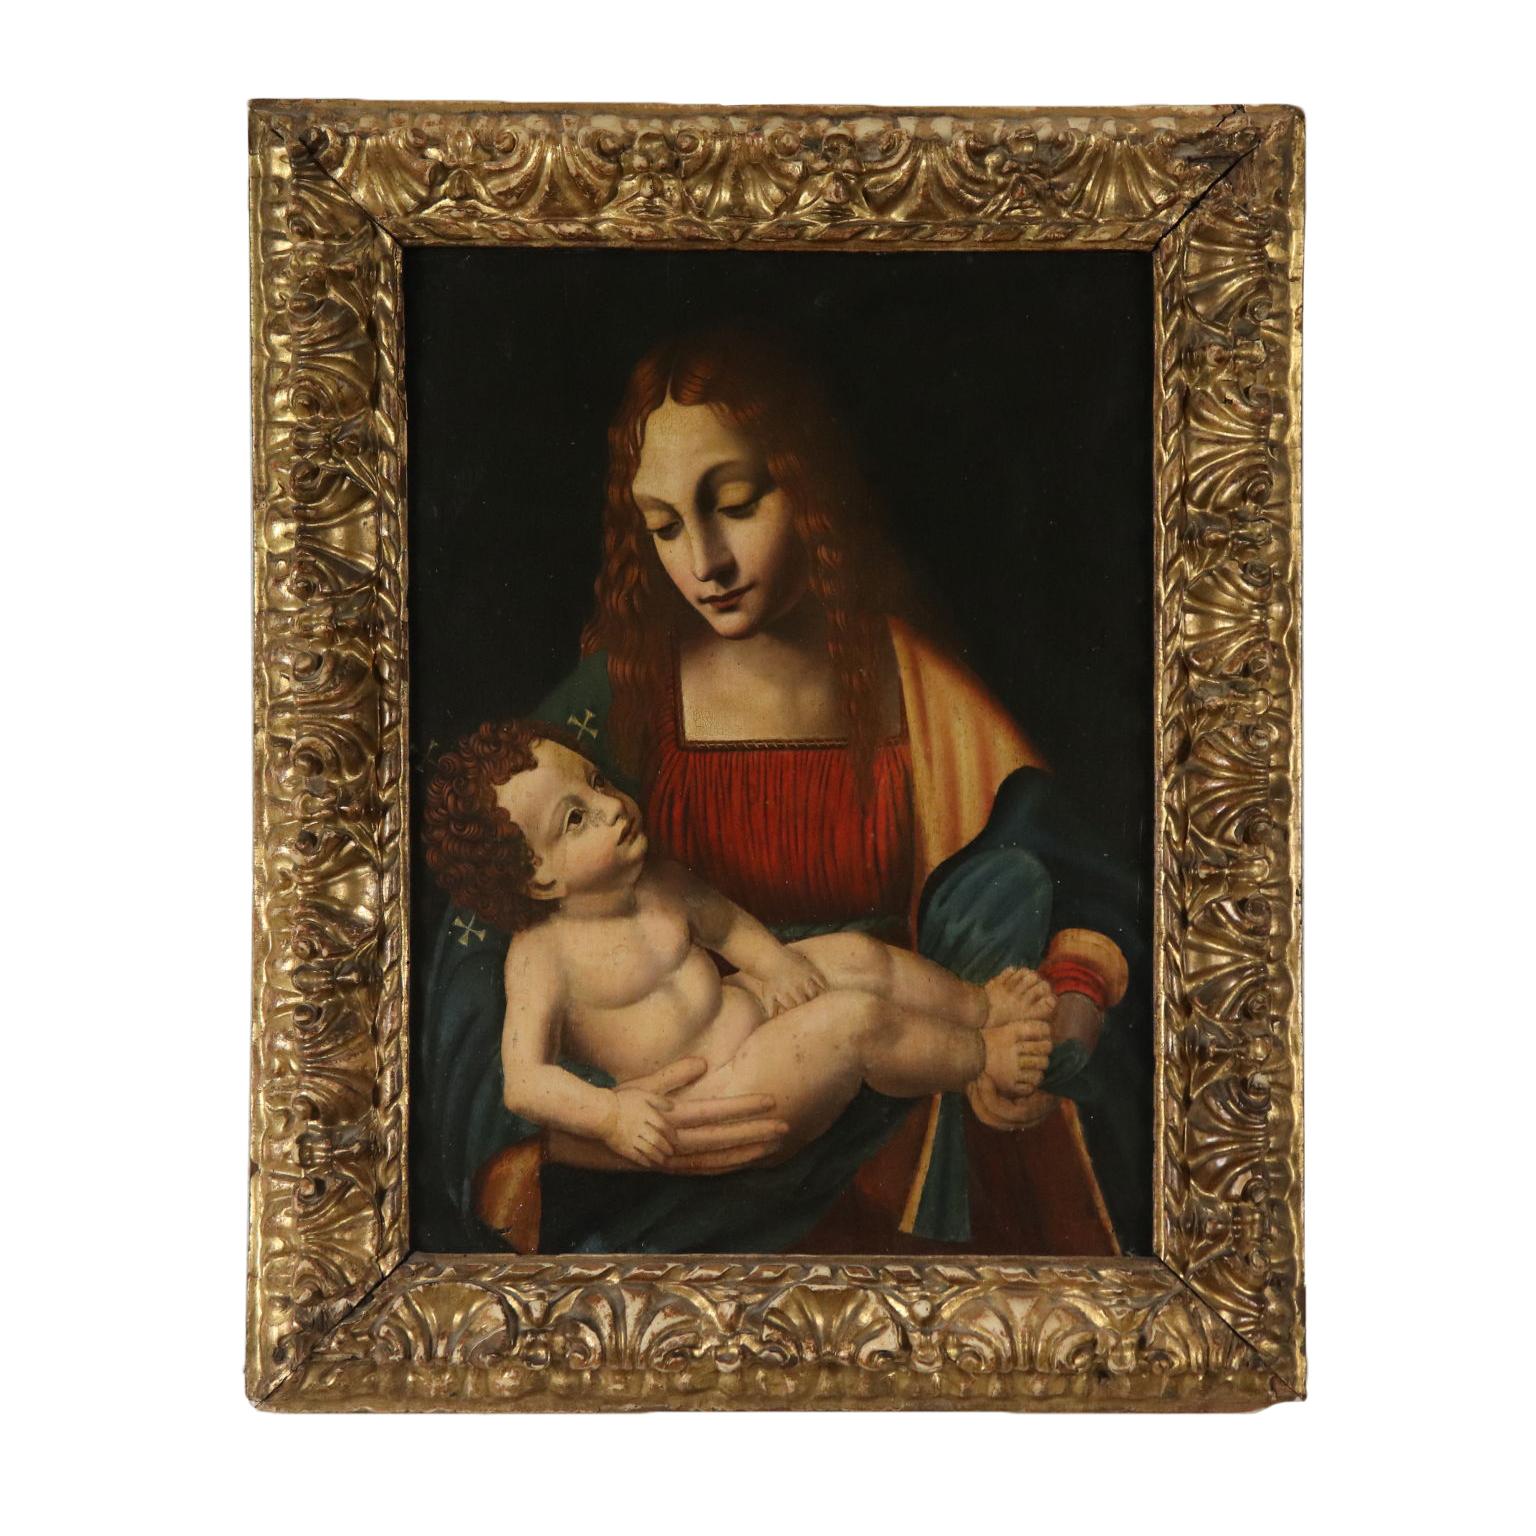 Unknown Portrait Painting - Madonna with Child Follower of Marco D'Oggiono Painting 17th Century